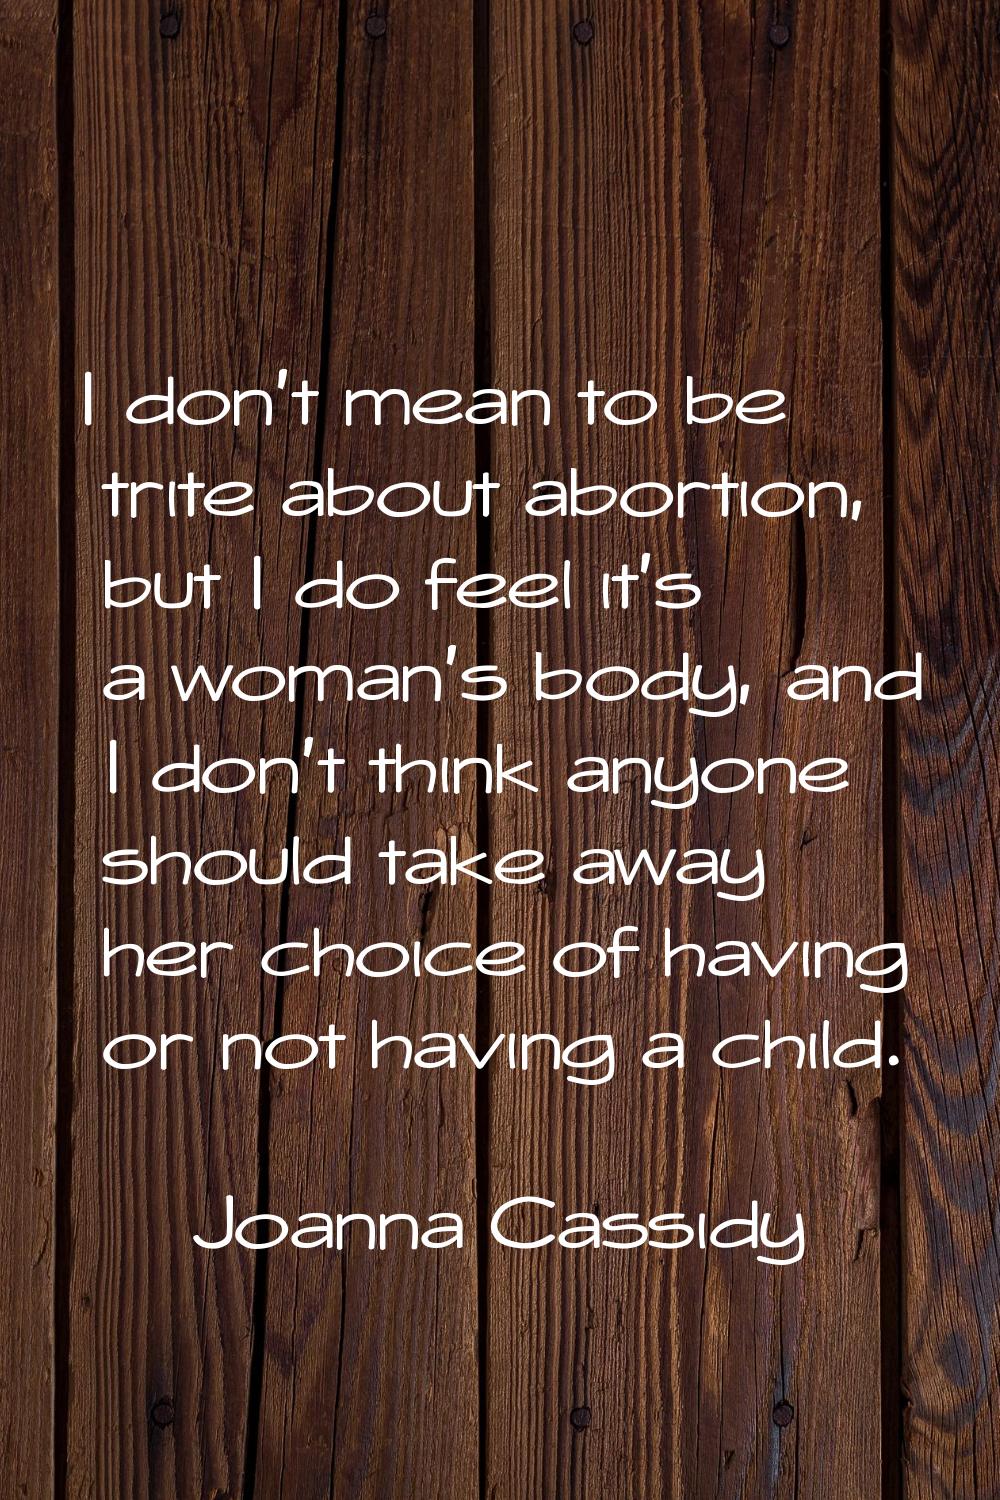 I don't mean to be trite about abortion, but I do feel it's a woman's body, and I don't think anyon